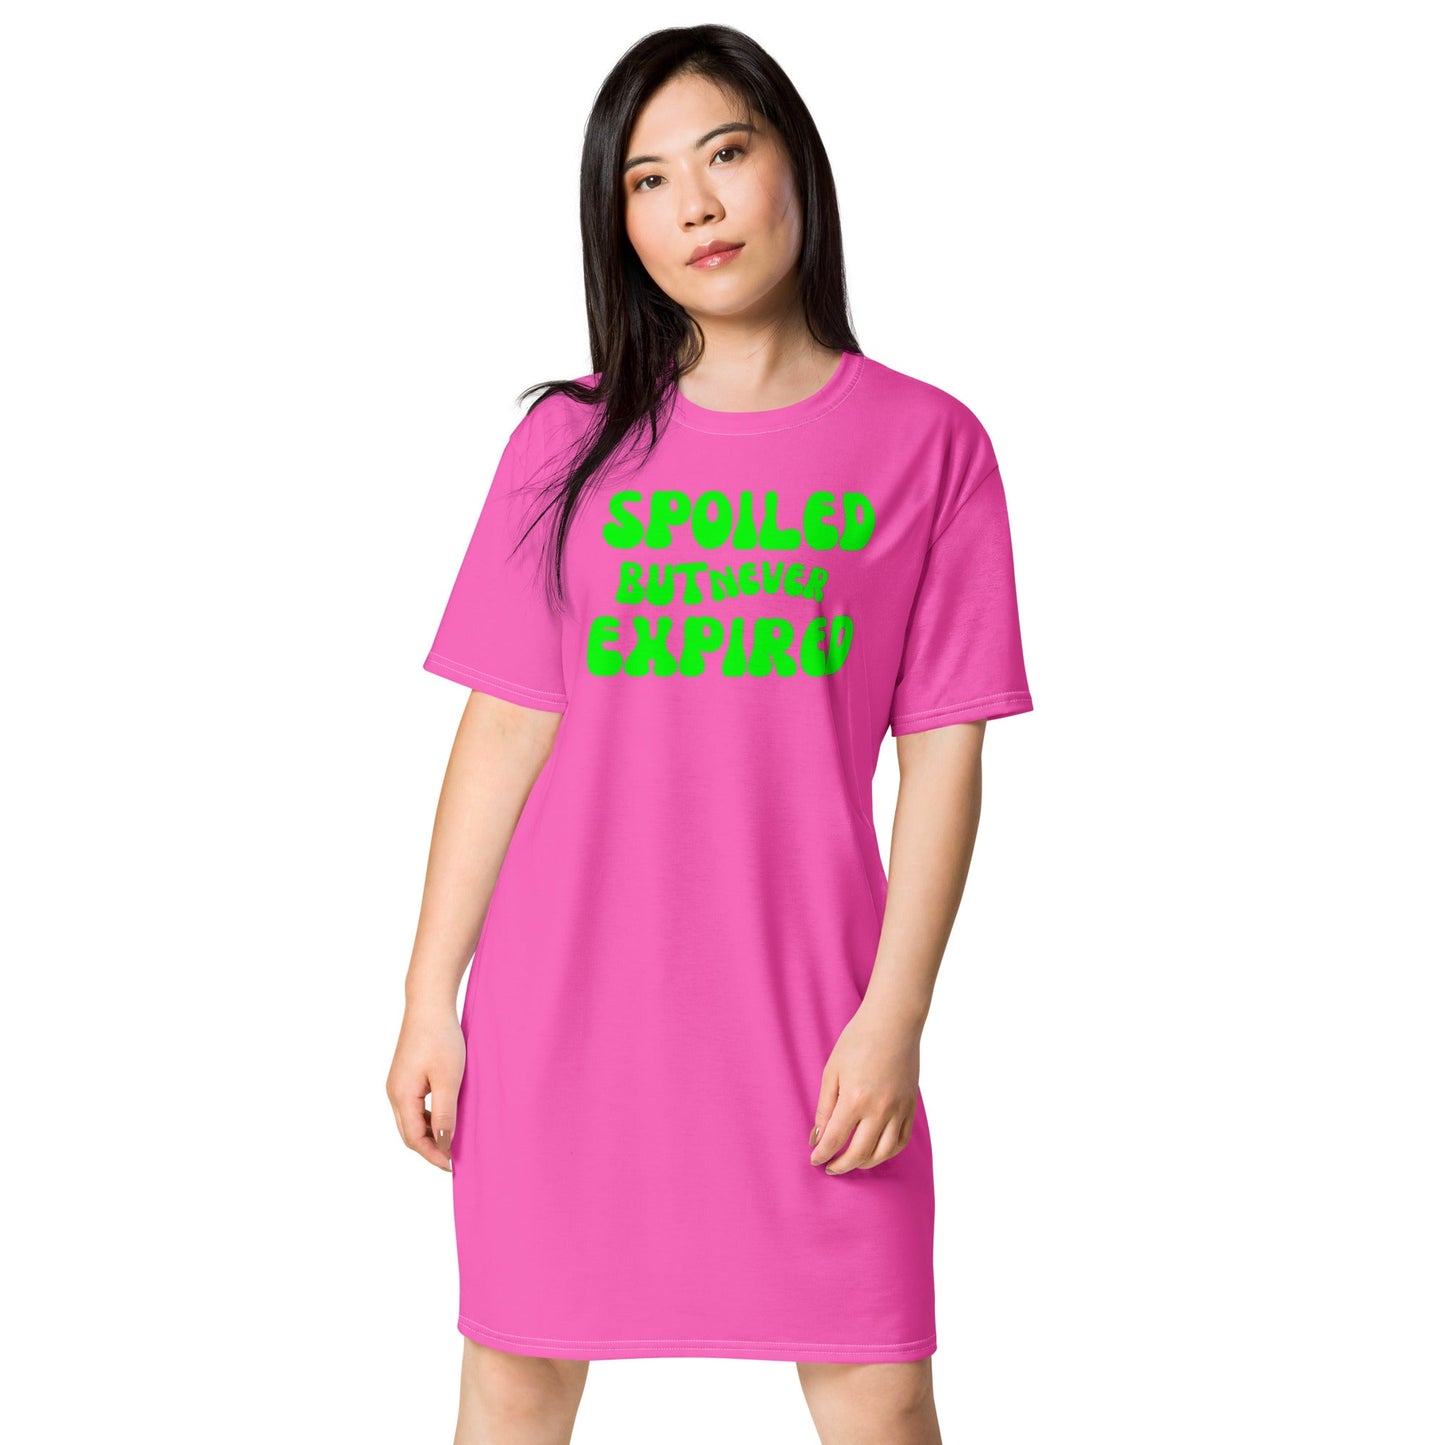 Spoiled But Never Expired T-shirt dress - Catch This Tea Shirts